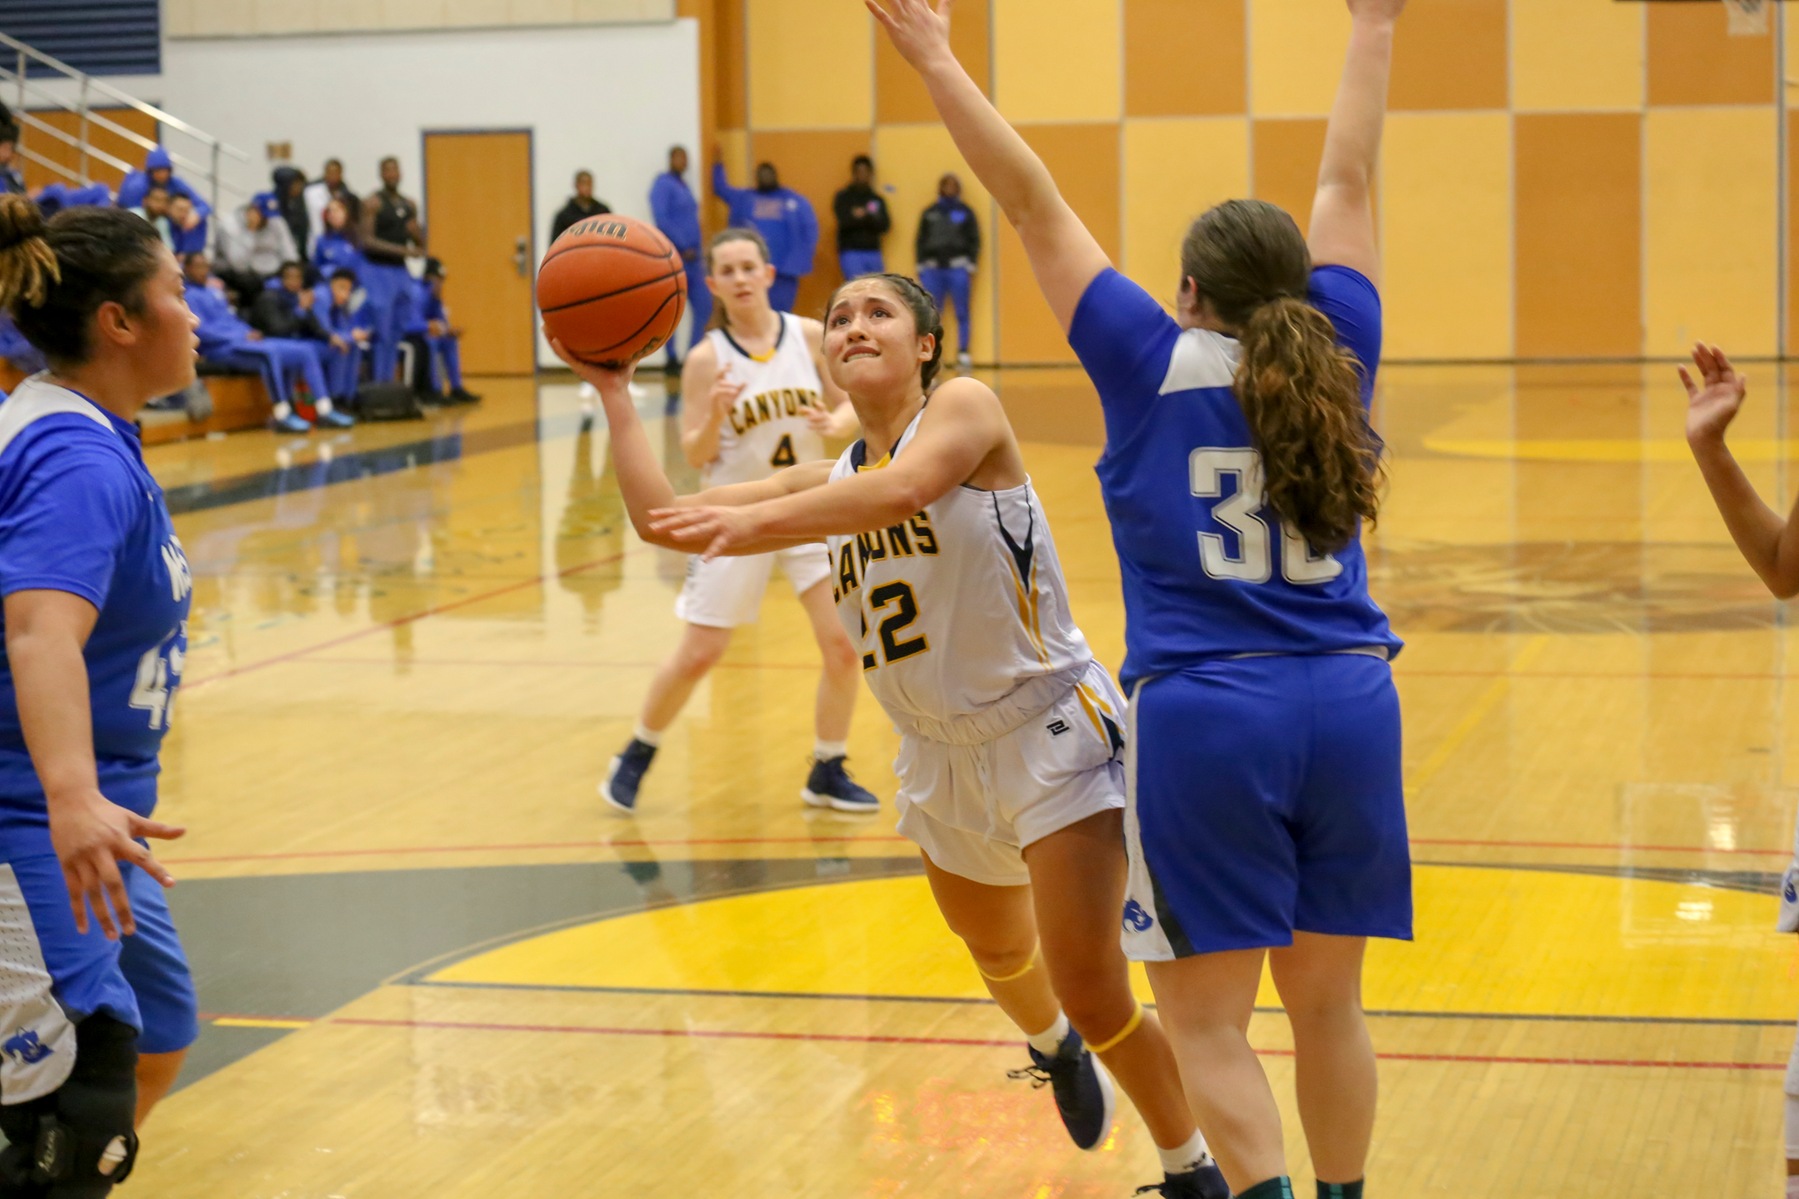 College of the Canyons women's basketball vs. West L.A. College on Feb. 2, 2019 at the Cougar Cage.